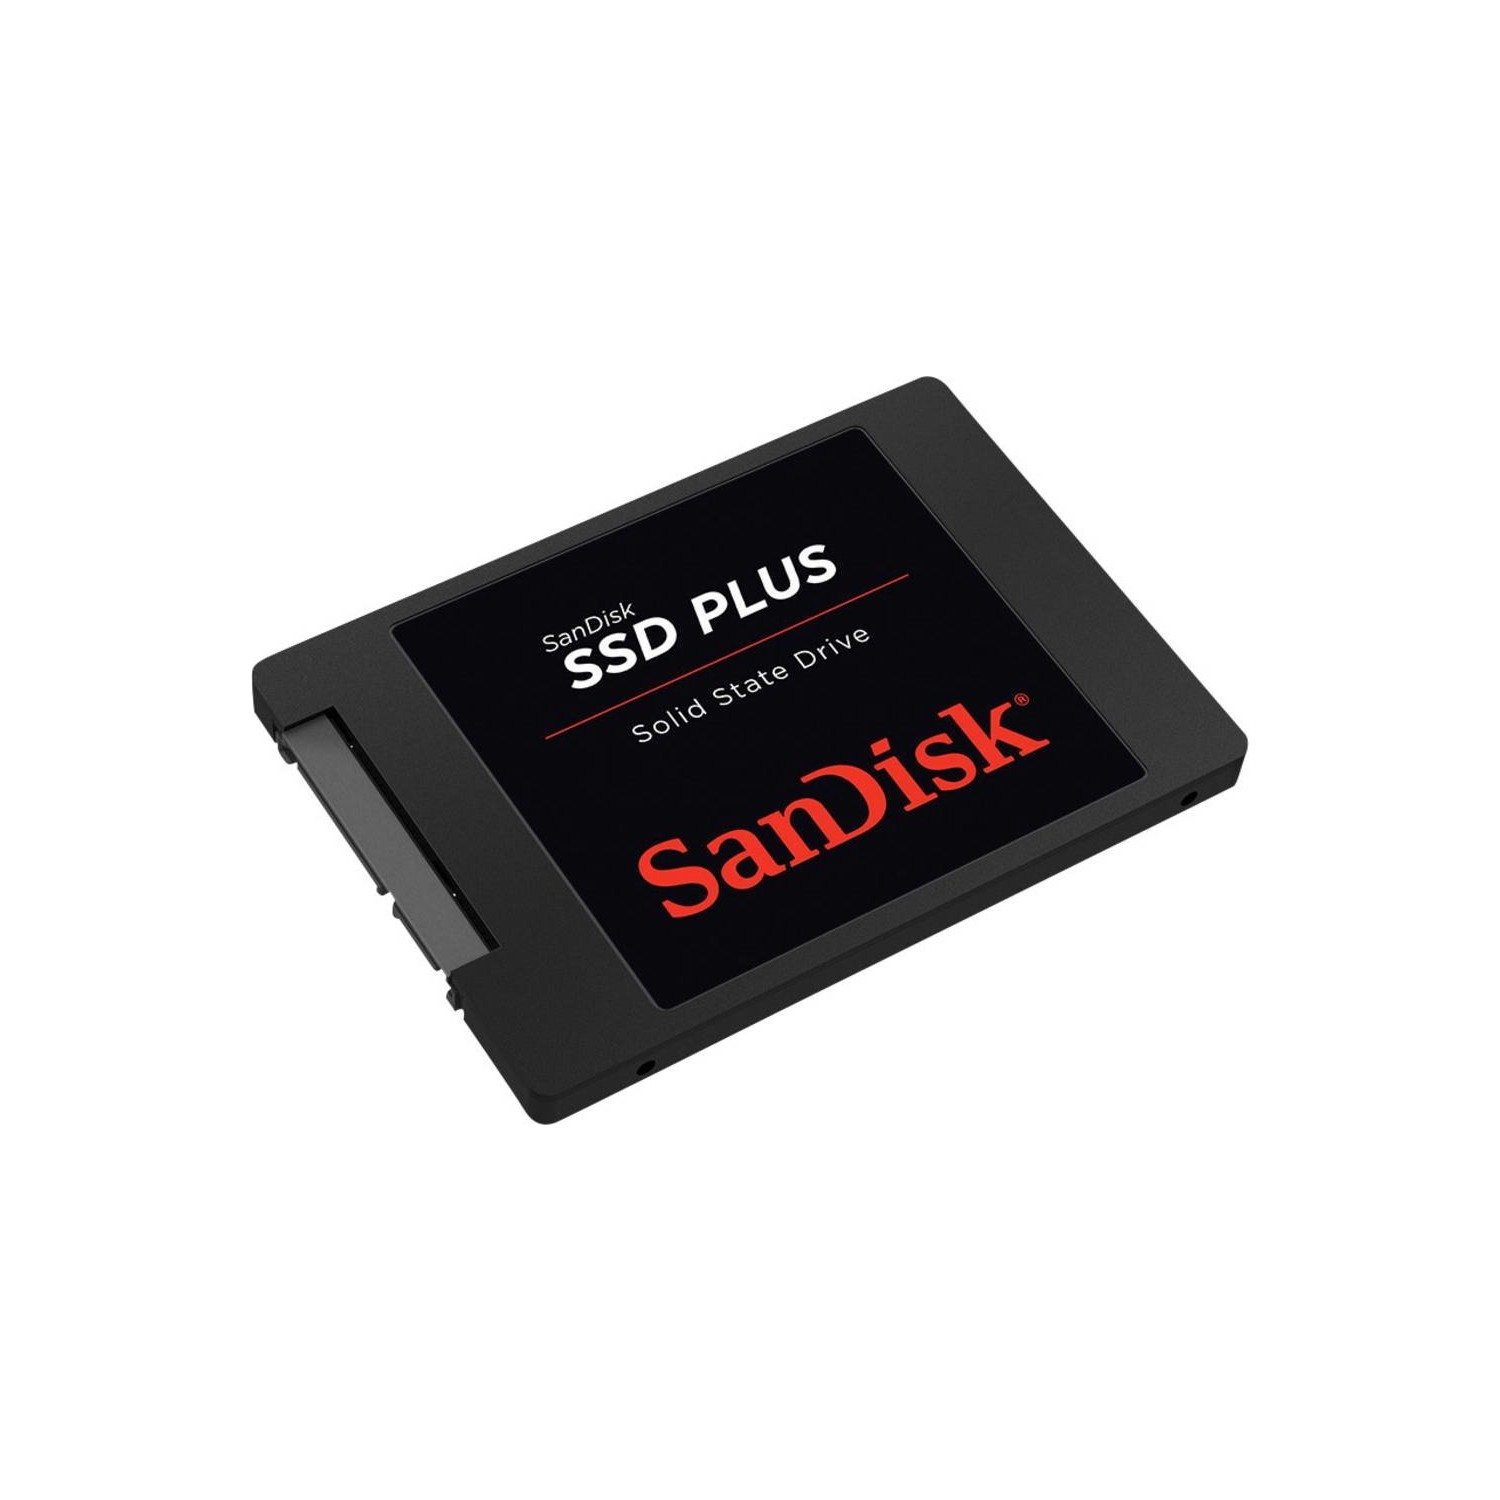 SANDISK SOLID STATE DRIVE PLUS 1TB SSD SATA III 2.5 Internal SANDISK SOLID STATE DRIVE PLUS 1TB [SDSSDA-1T00-G26] - $69.00 : Professional Multi Monitor Graphics Experts